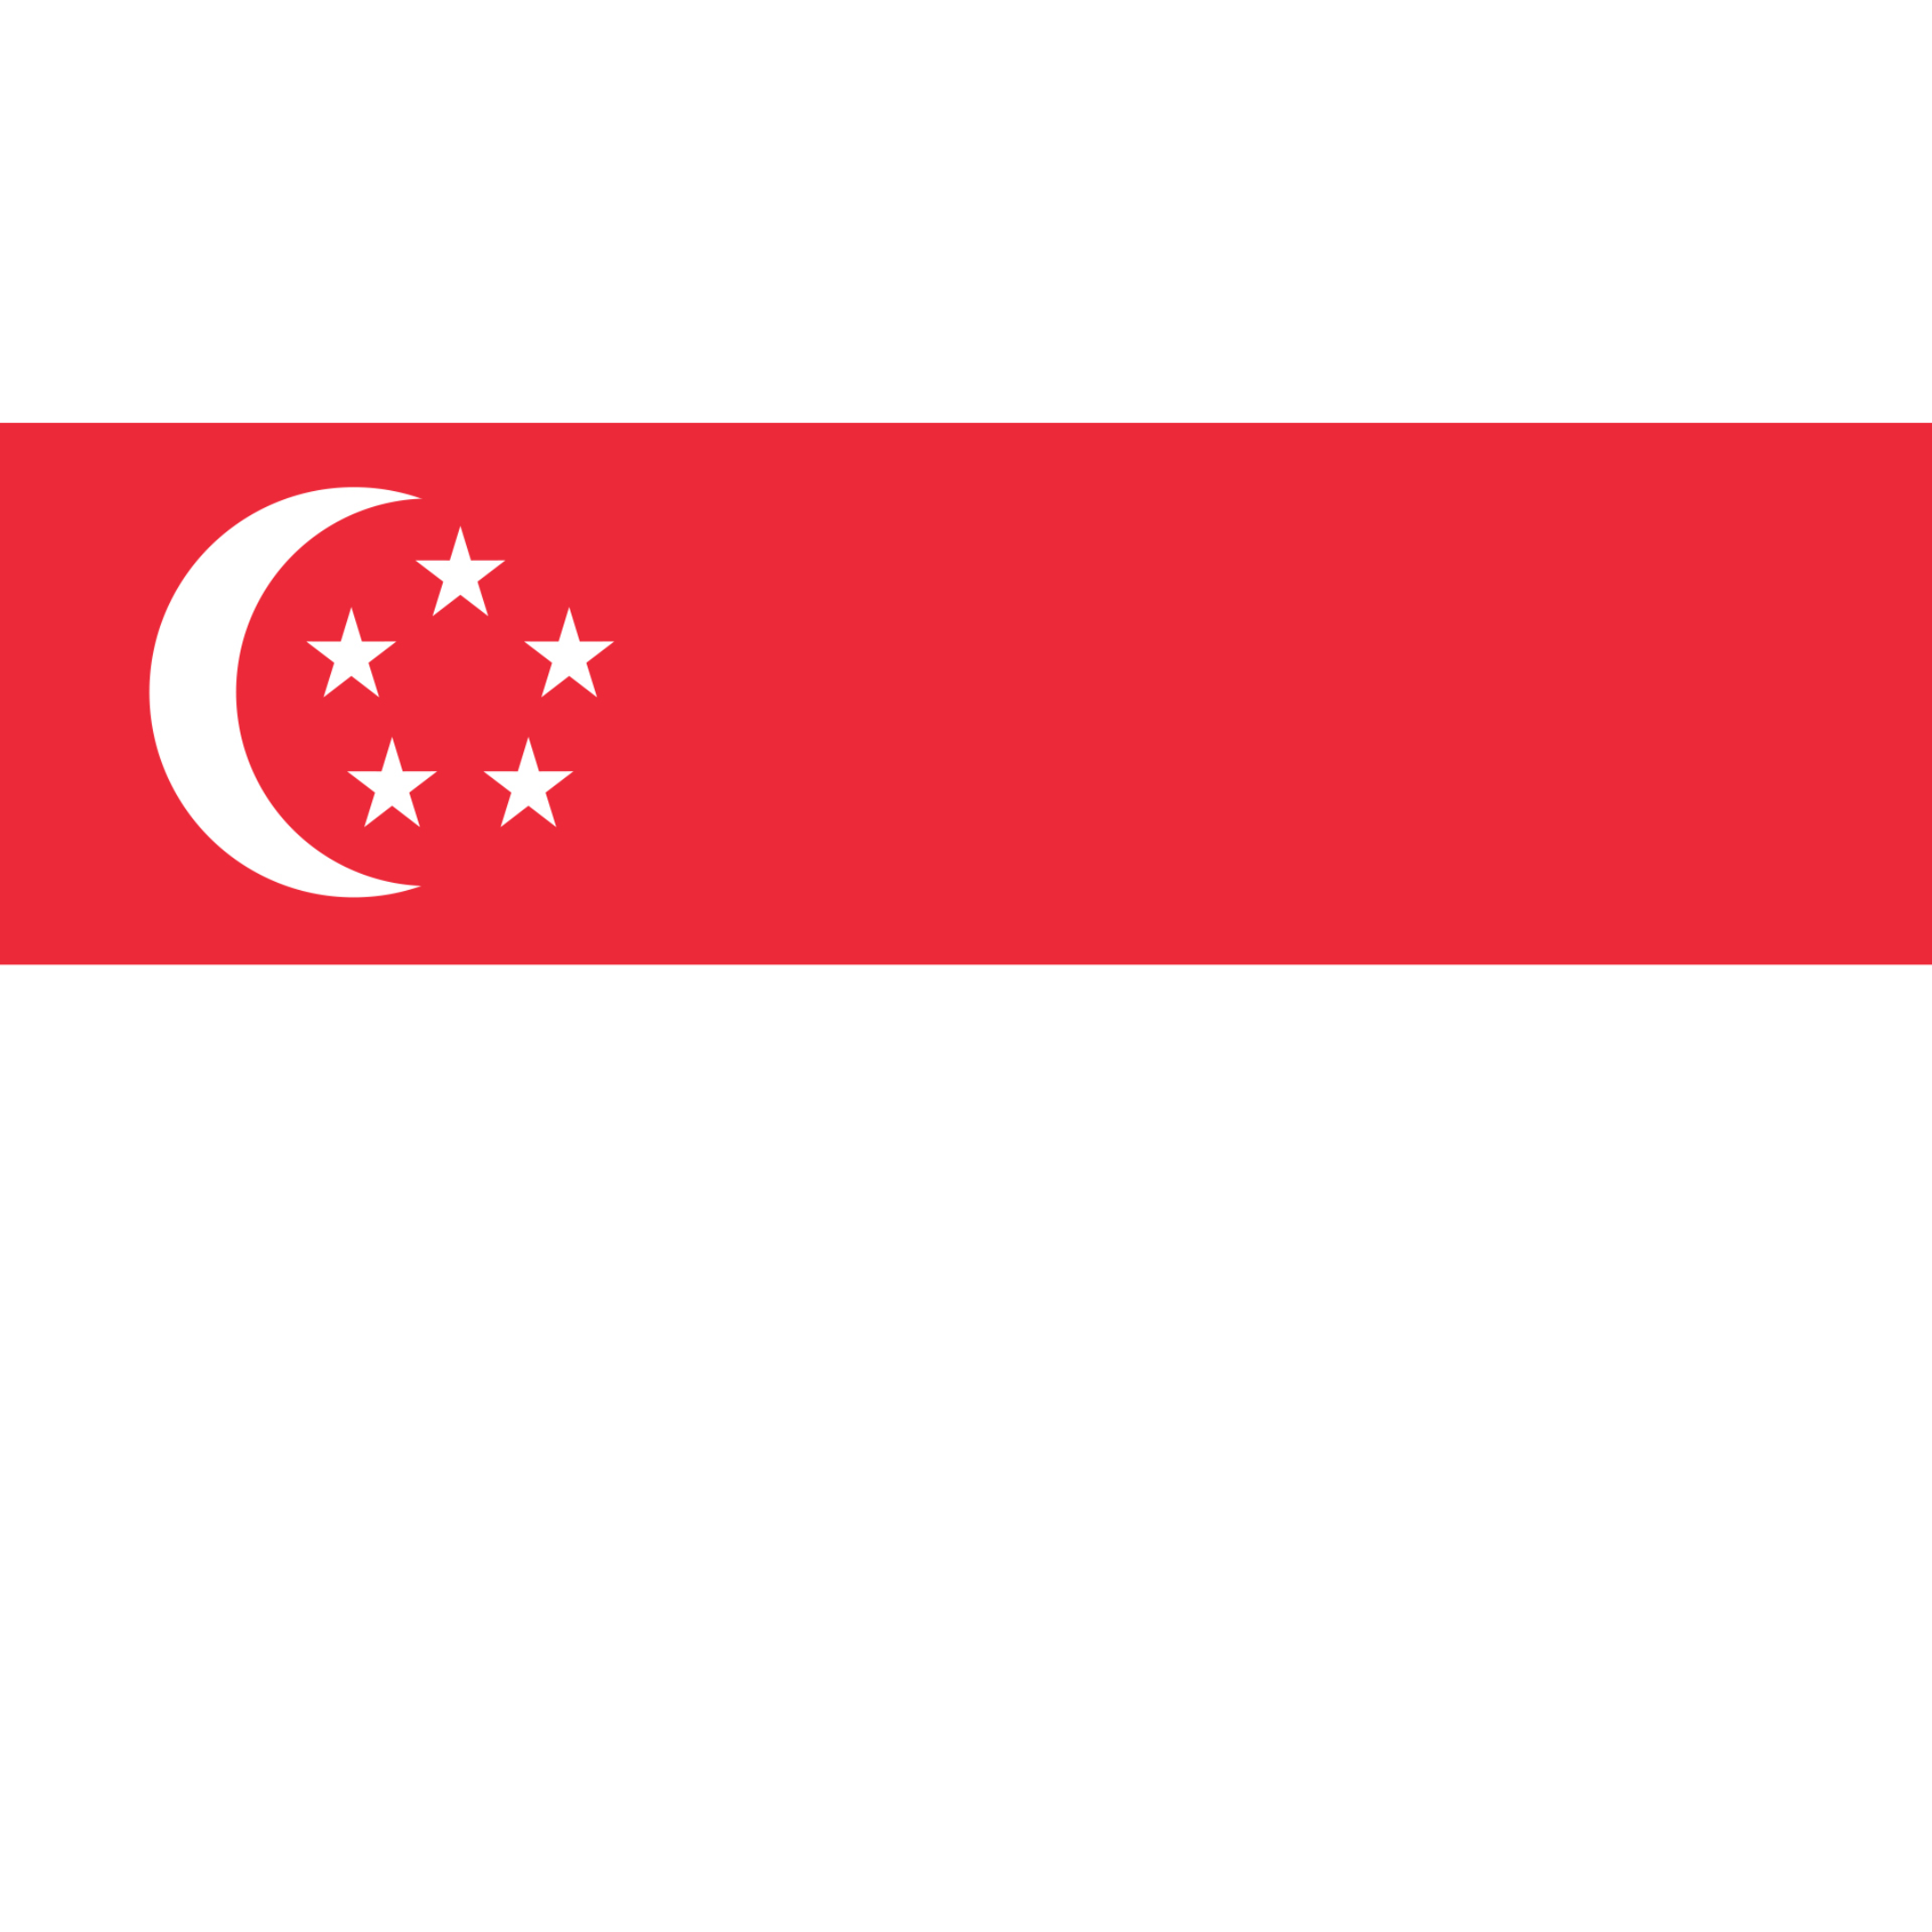 The Singapore flag has 2 horizontal red and white halves with a white crescent moon and five small white stars on the left. 